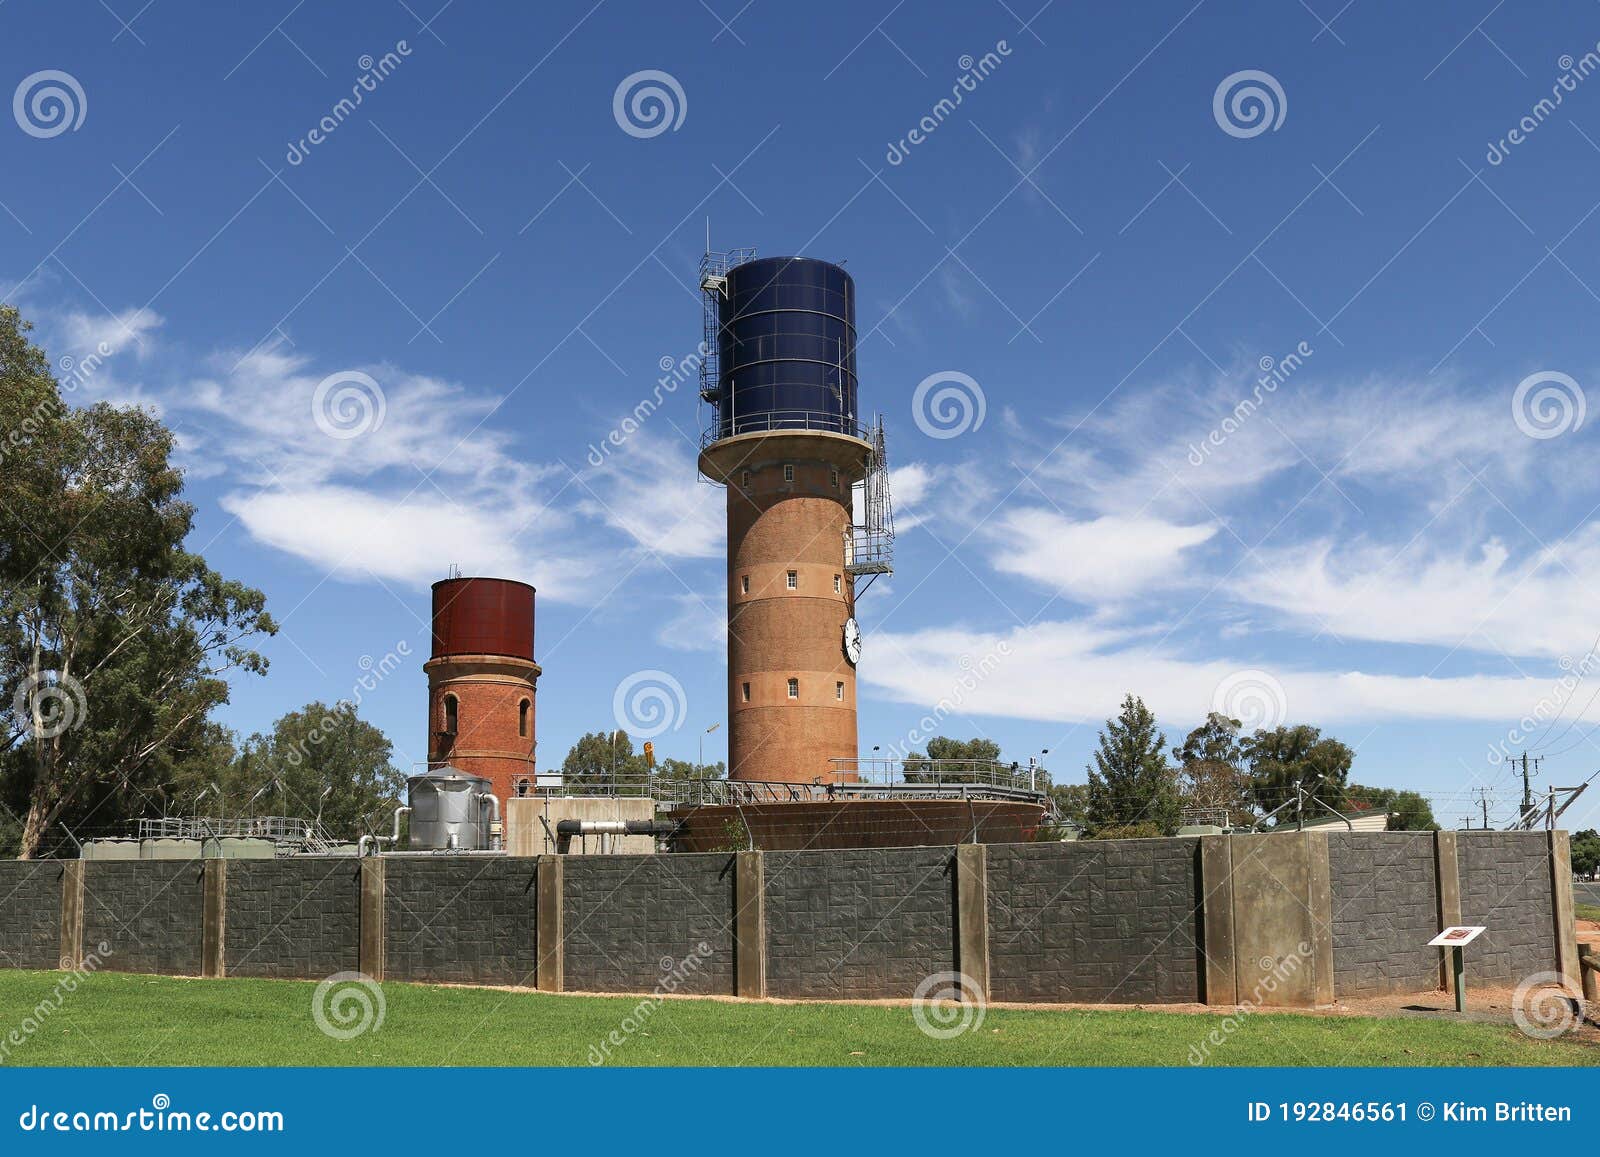 The Old Water Tower Brick with Cast Iron Tank Was from the 1880s To 1914 when a Editorial Photo - of enclosure, editorial: 192846561